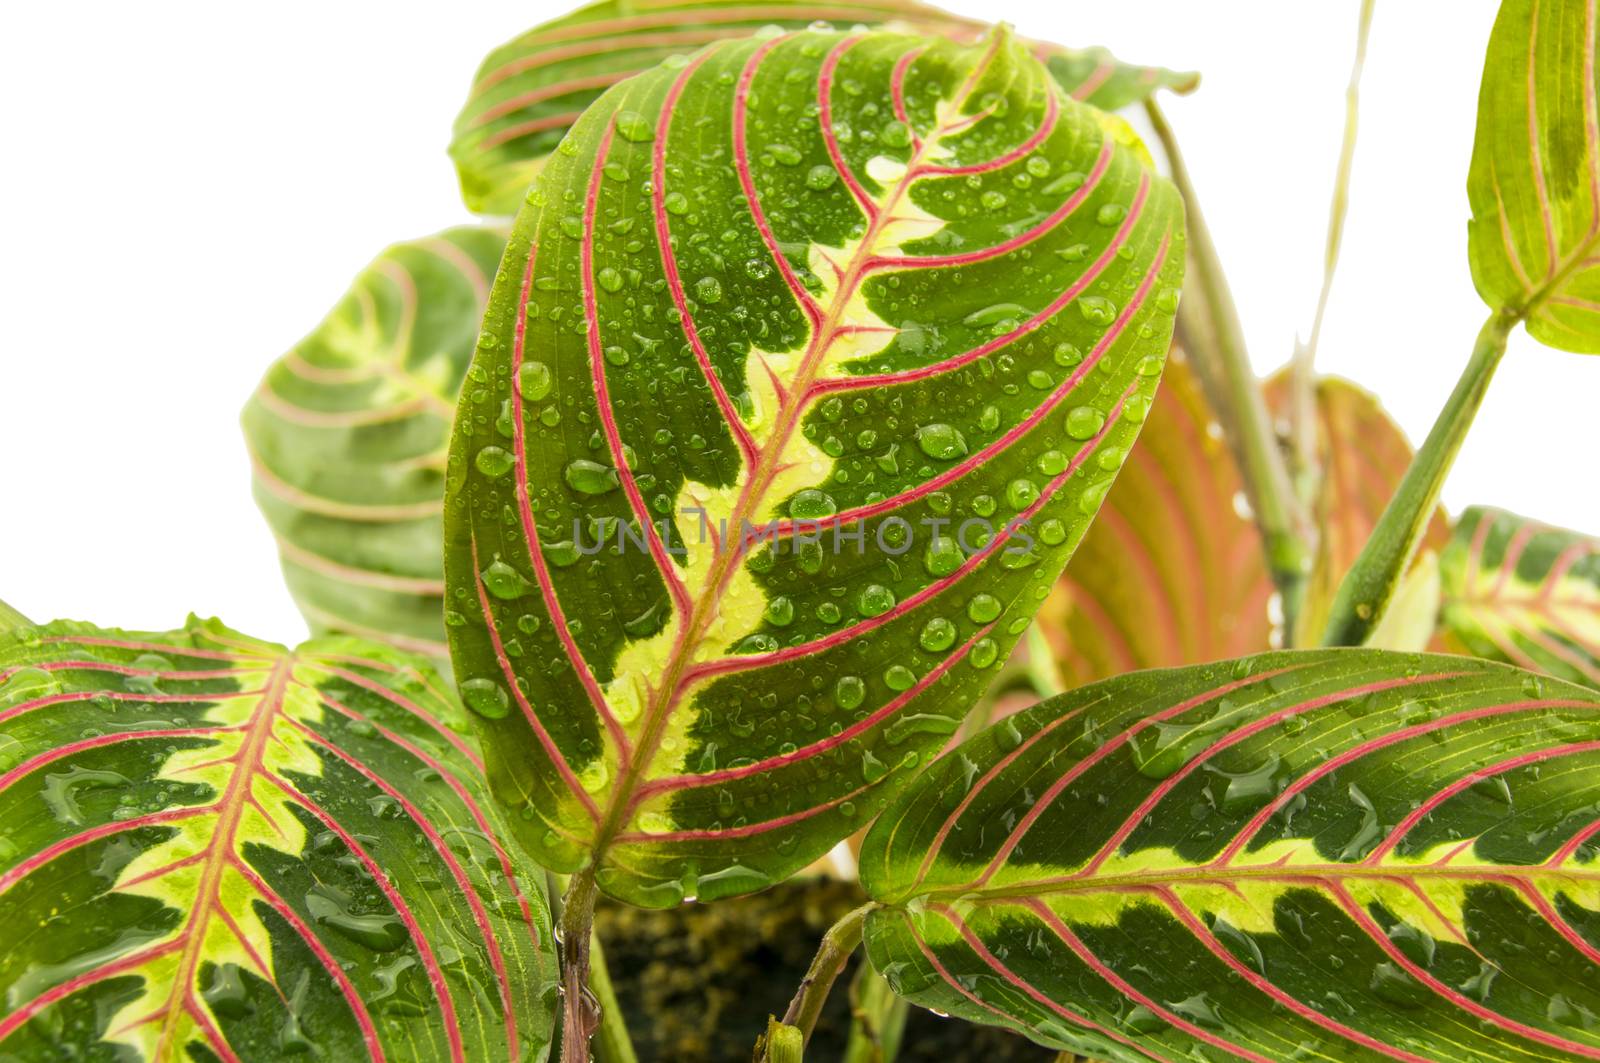 Maranta houseplant on a white background. For your commercial and editorial use